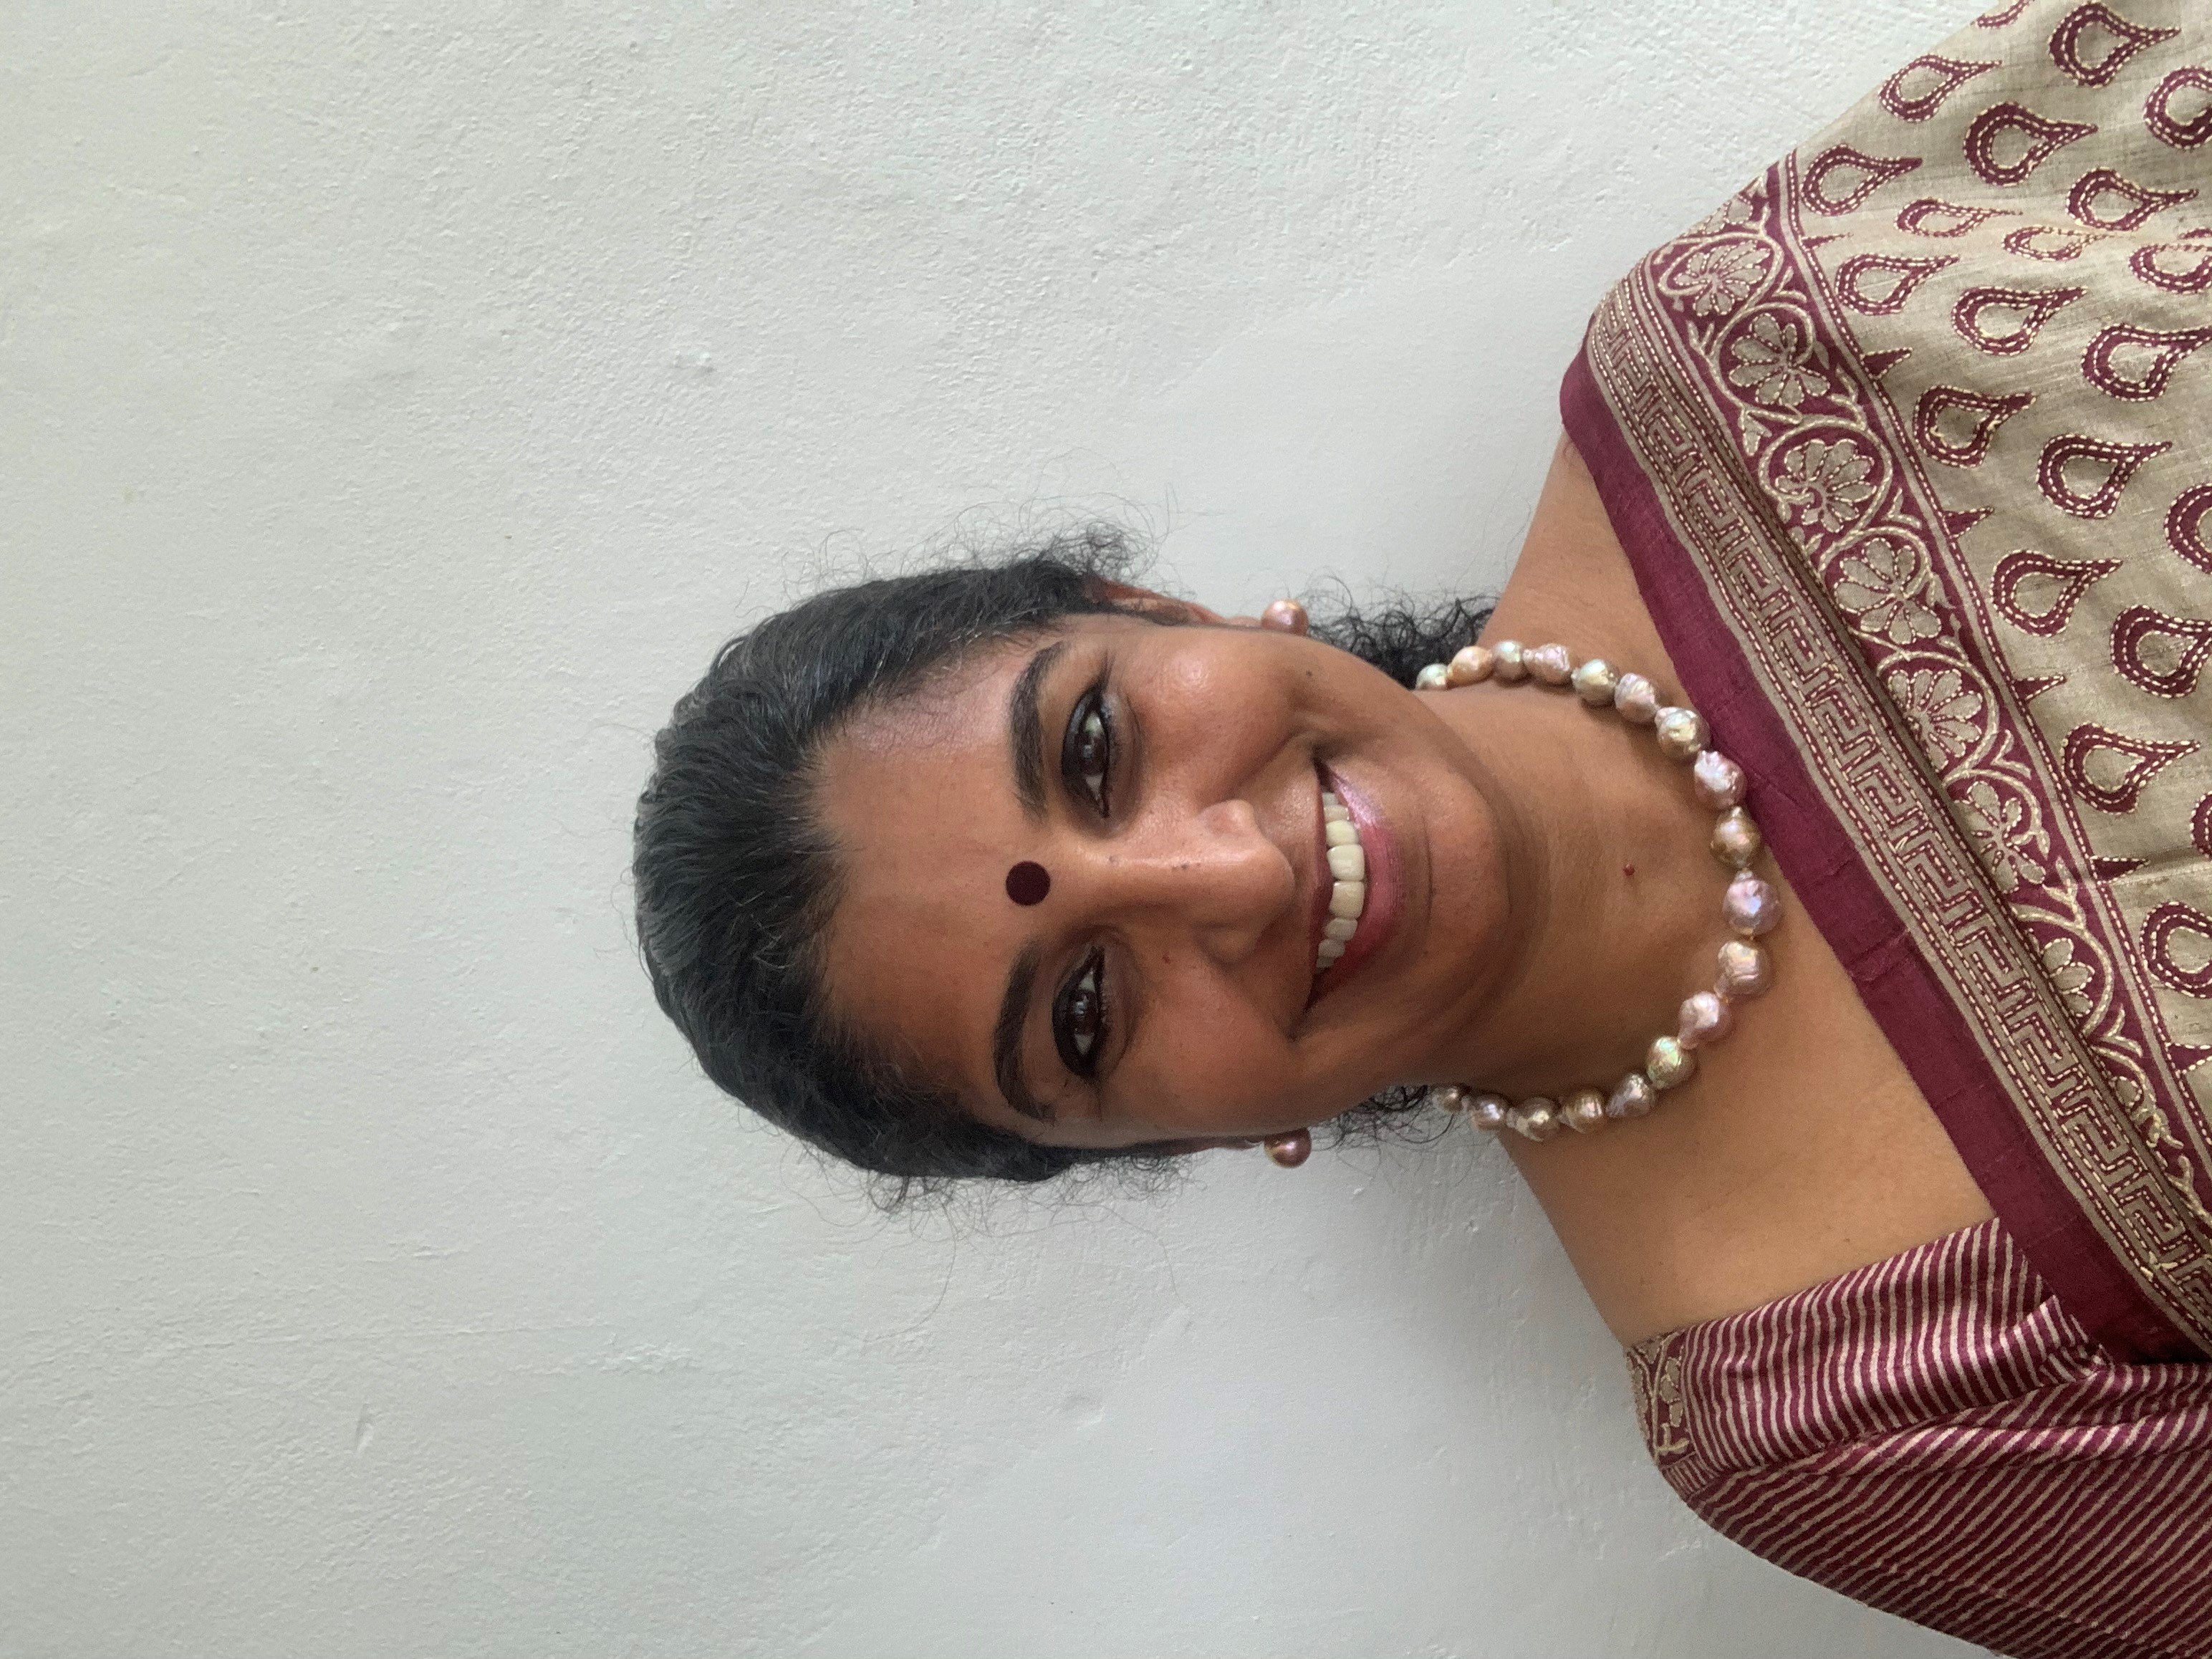 Manjusha Nair, <span>Country Director & VP for Service Delivery, India, SAP Concur</span>